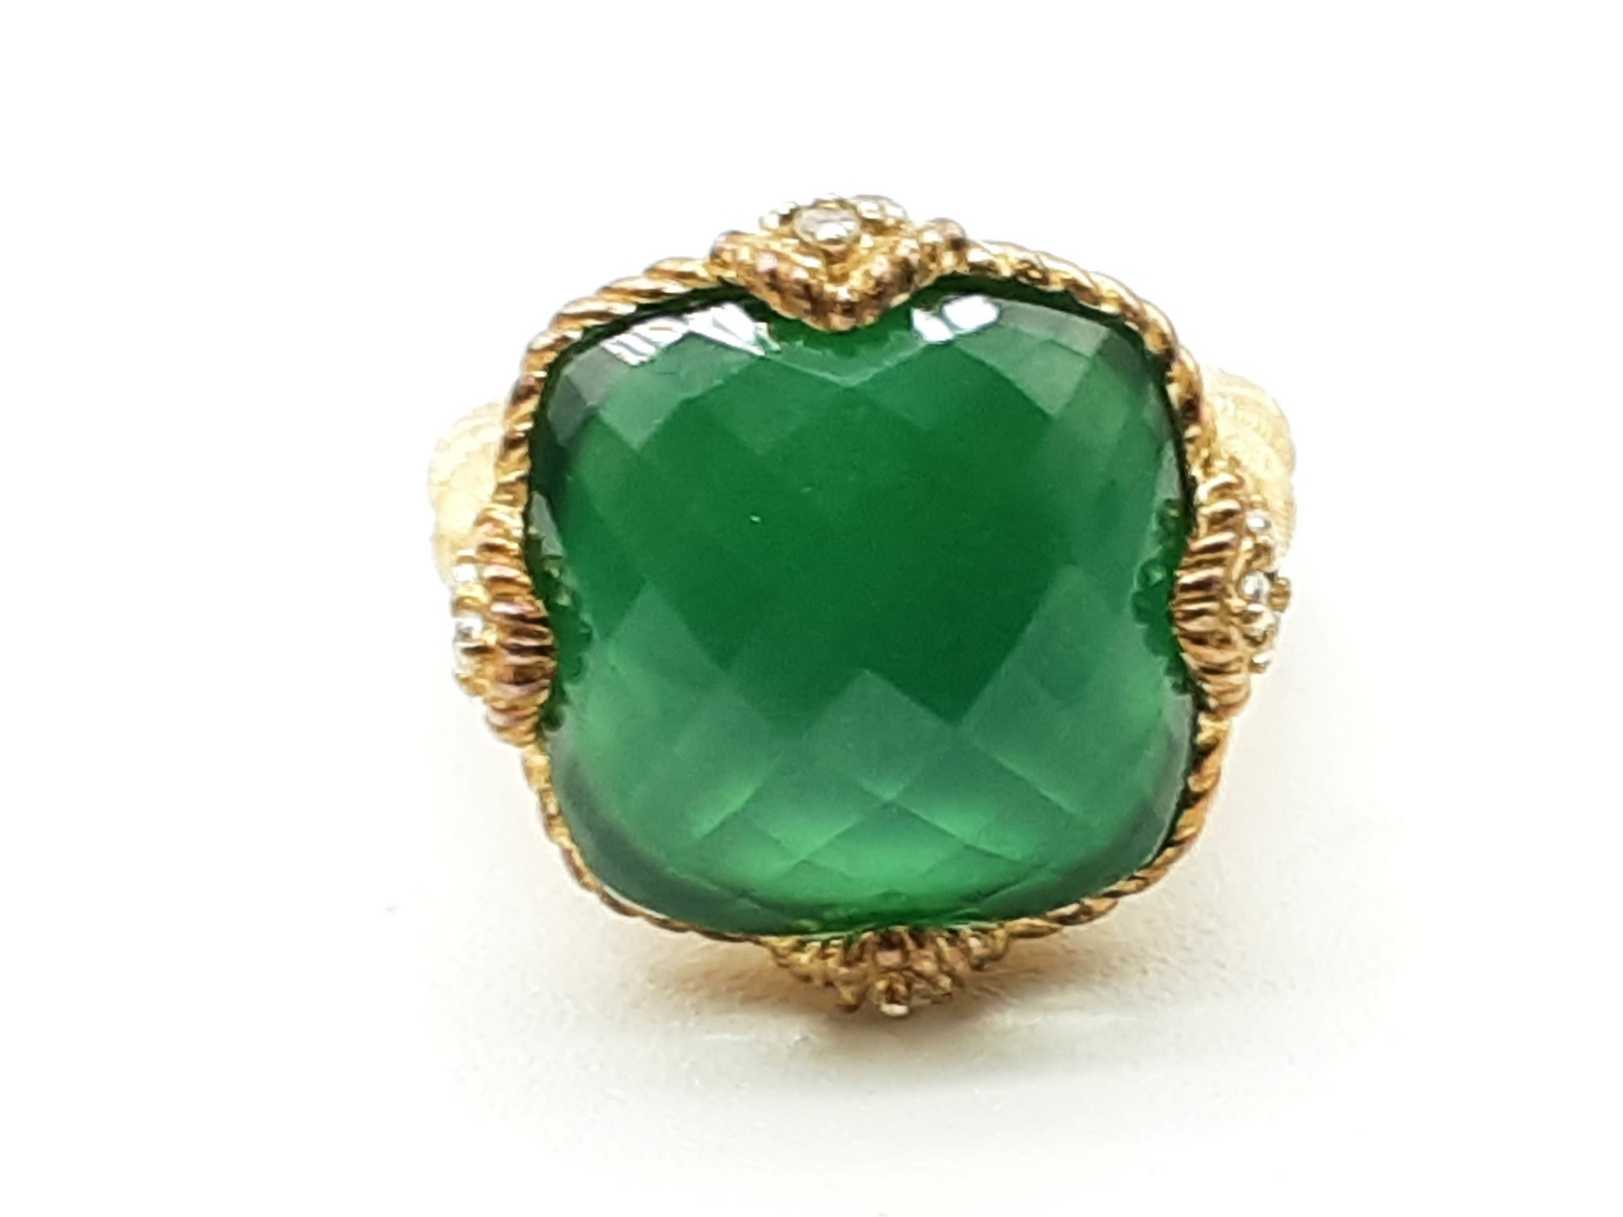 Judith Rippka Gold Plated Silver Green Goddess Ring Size 7 Dolrxde 144020012559